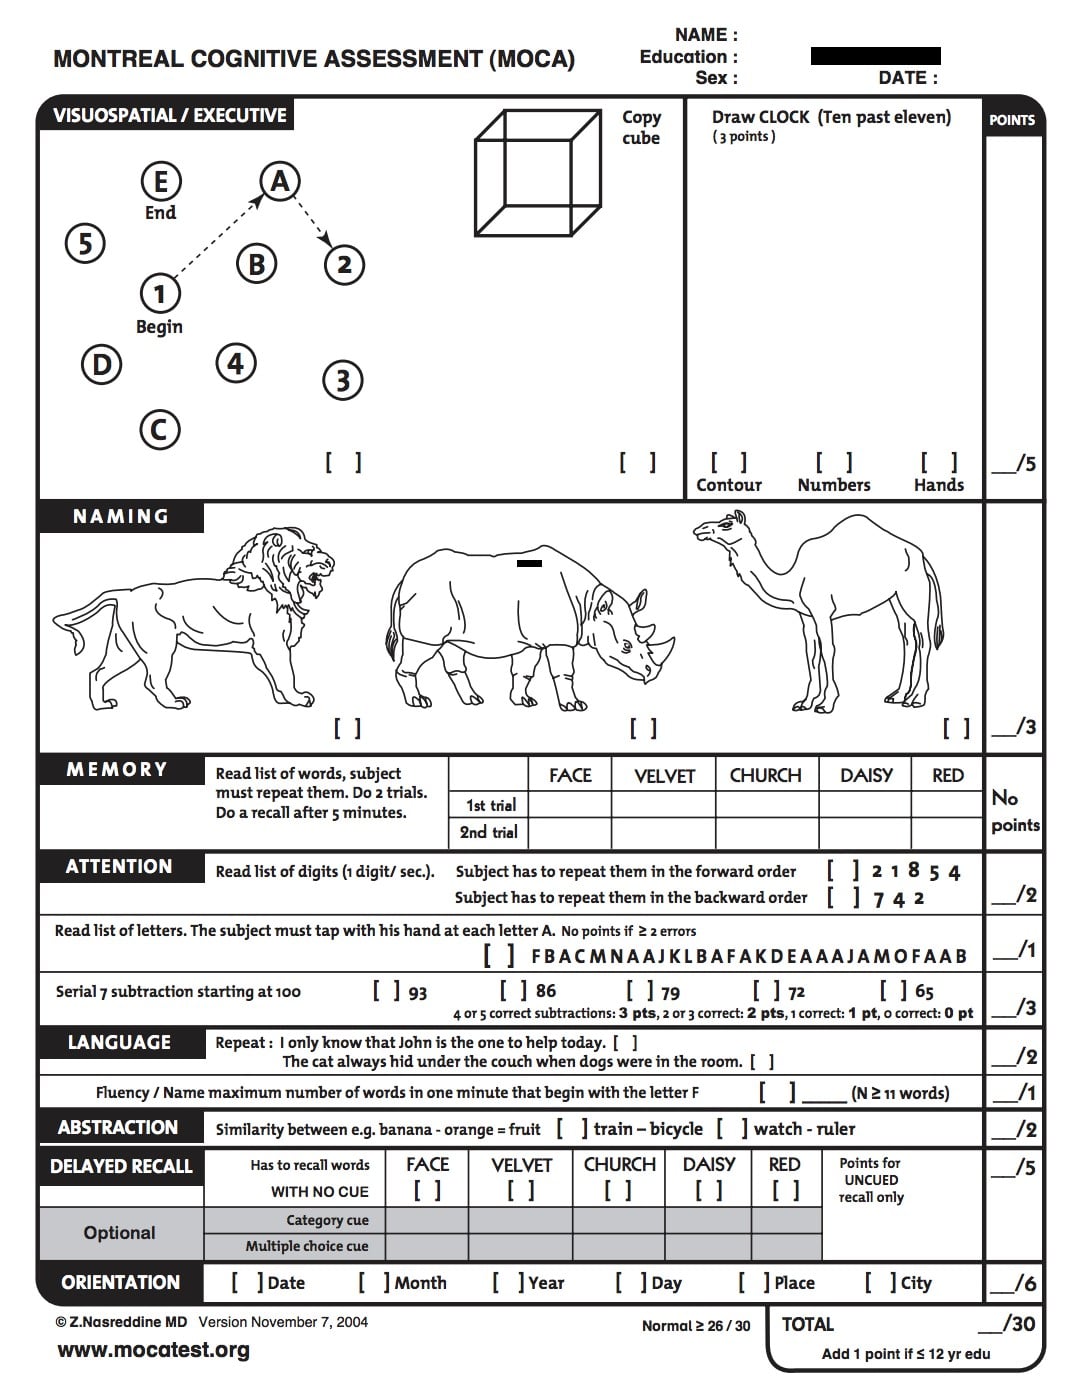 The Montreal Cognitive Assessment: Not an Intelligence Test